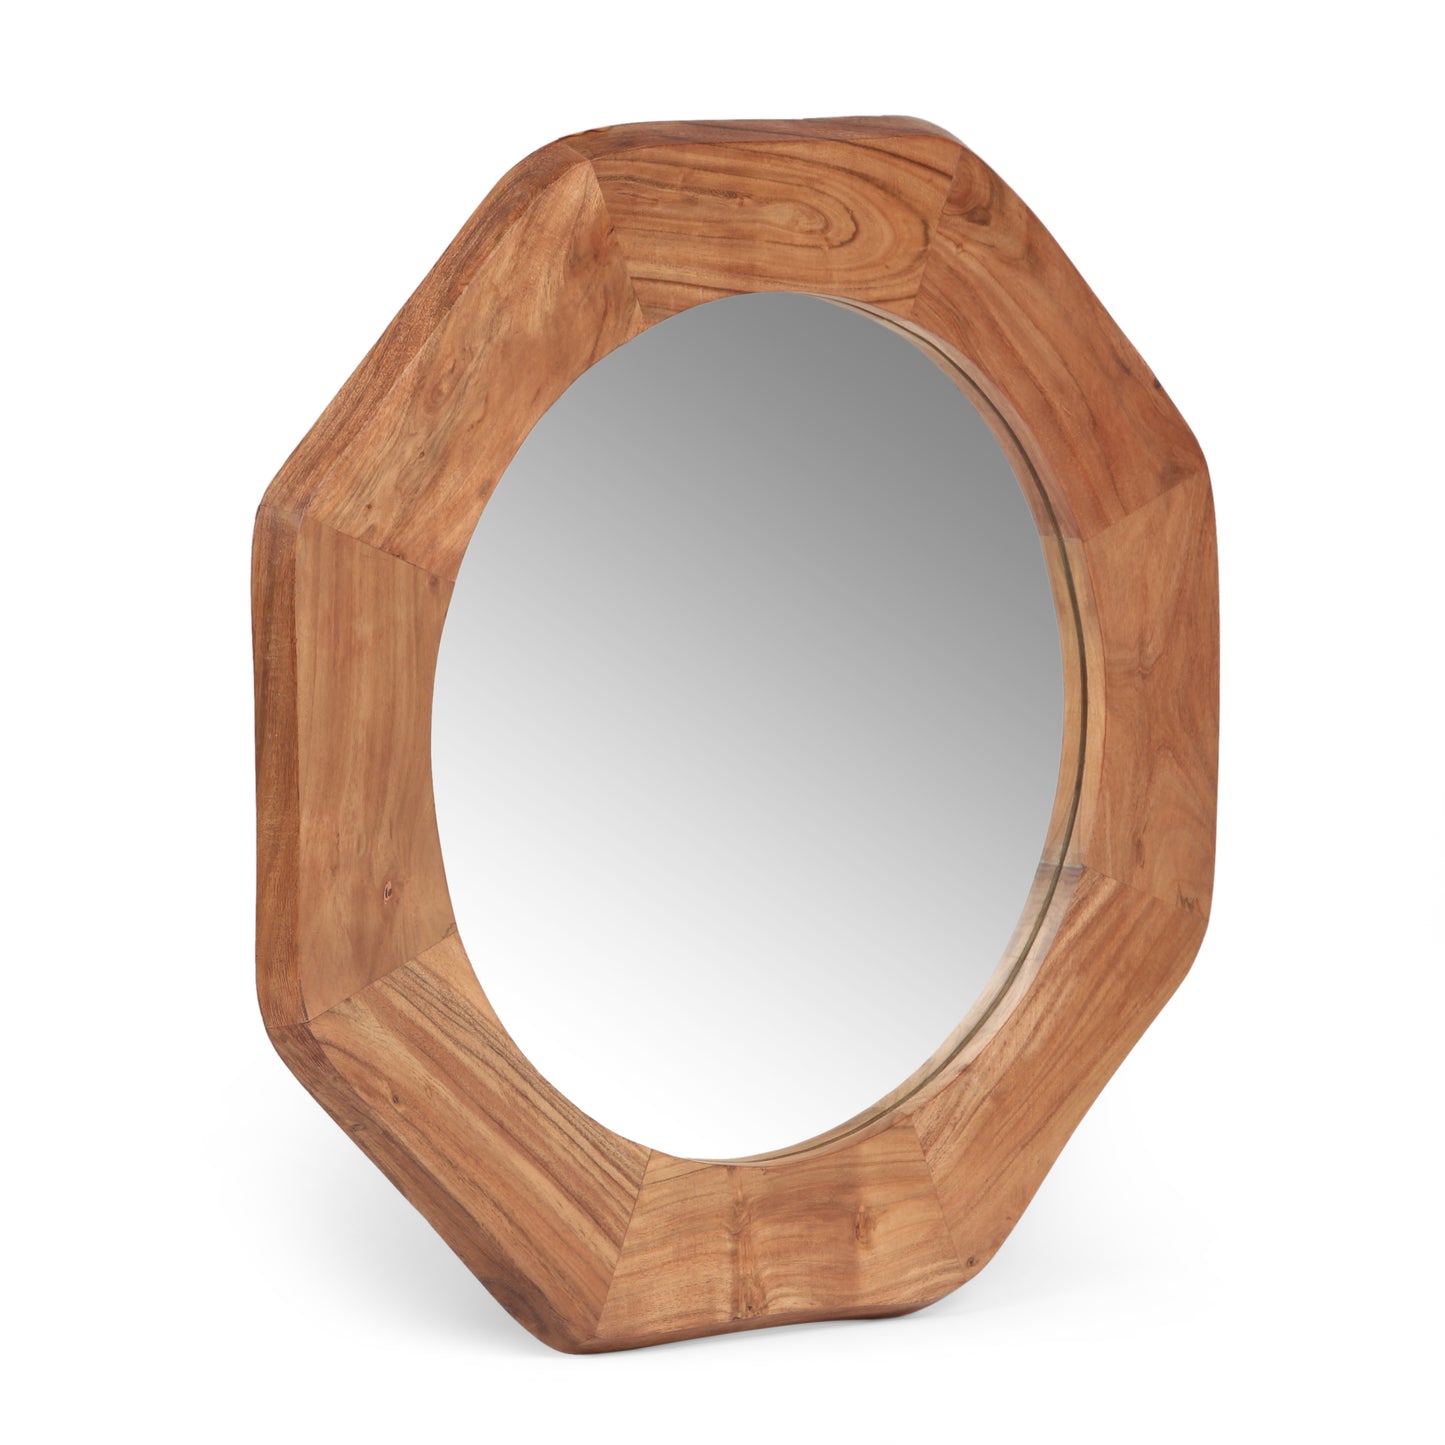 Ferrat Rustic Handcrafted Acacia Wood Round Wall Mirror, Natural